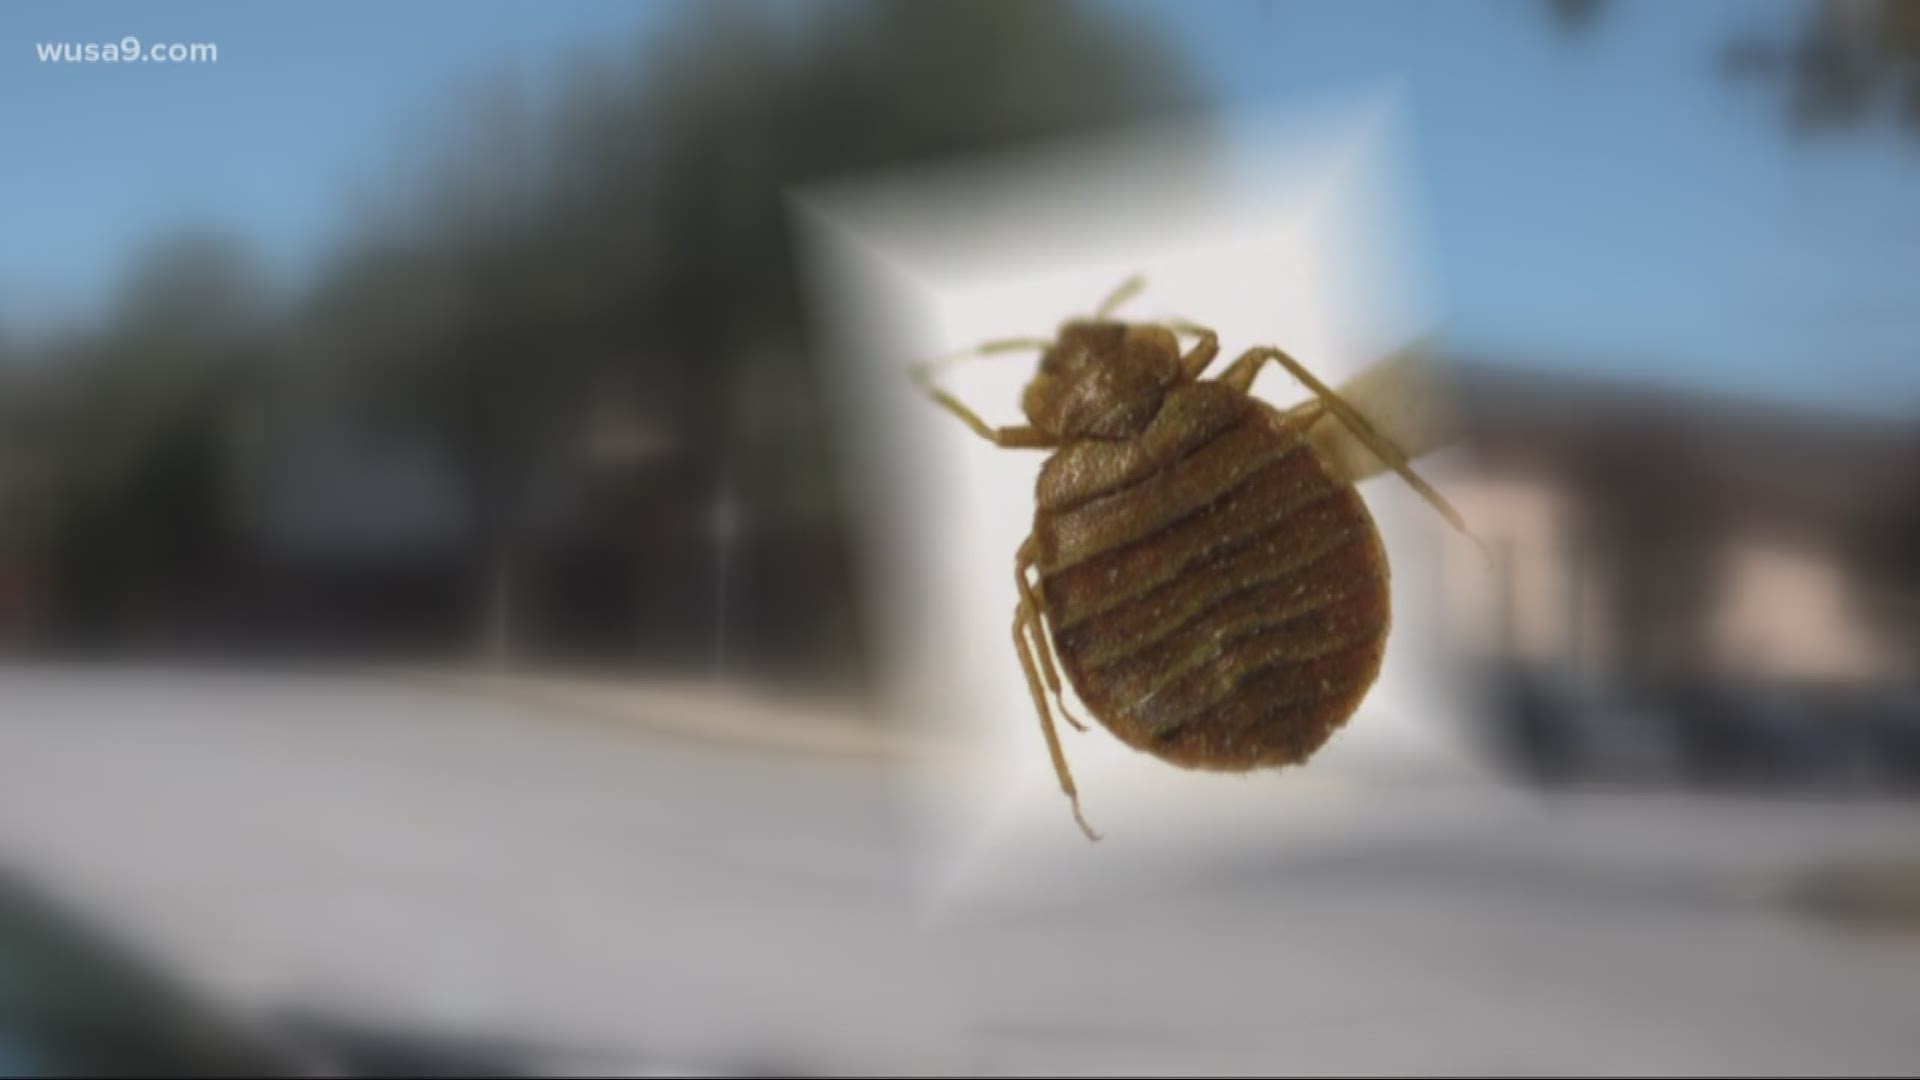 Authorities in Prince George's County have notified parents that bed bugs have been discovered at Walker Mill Middle School.